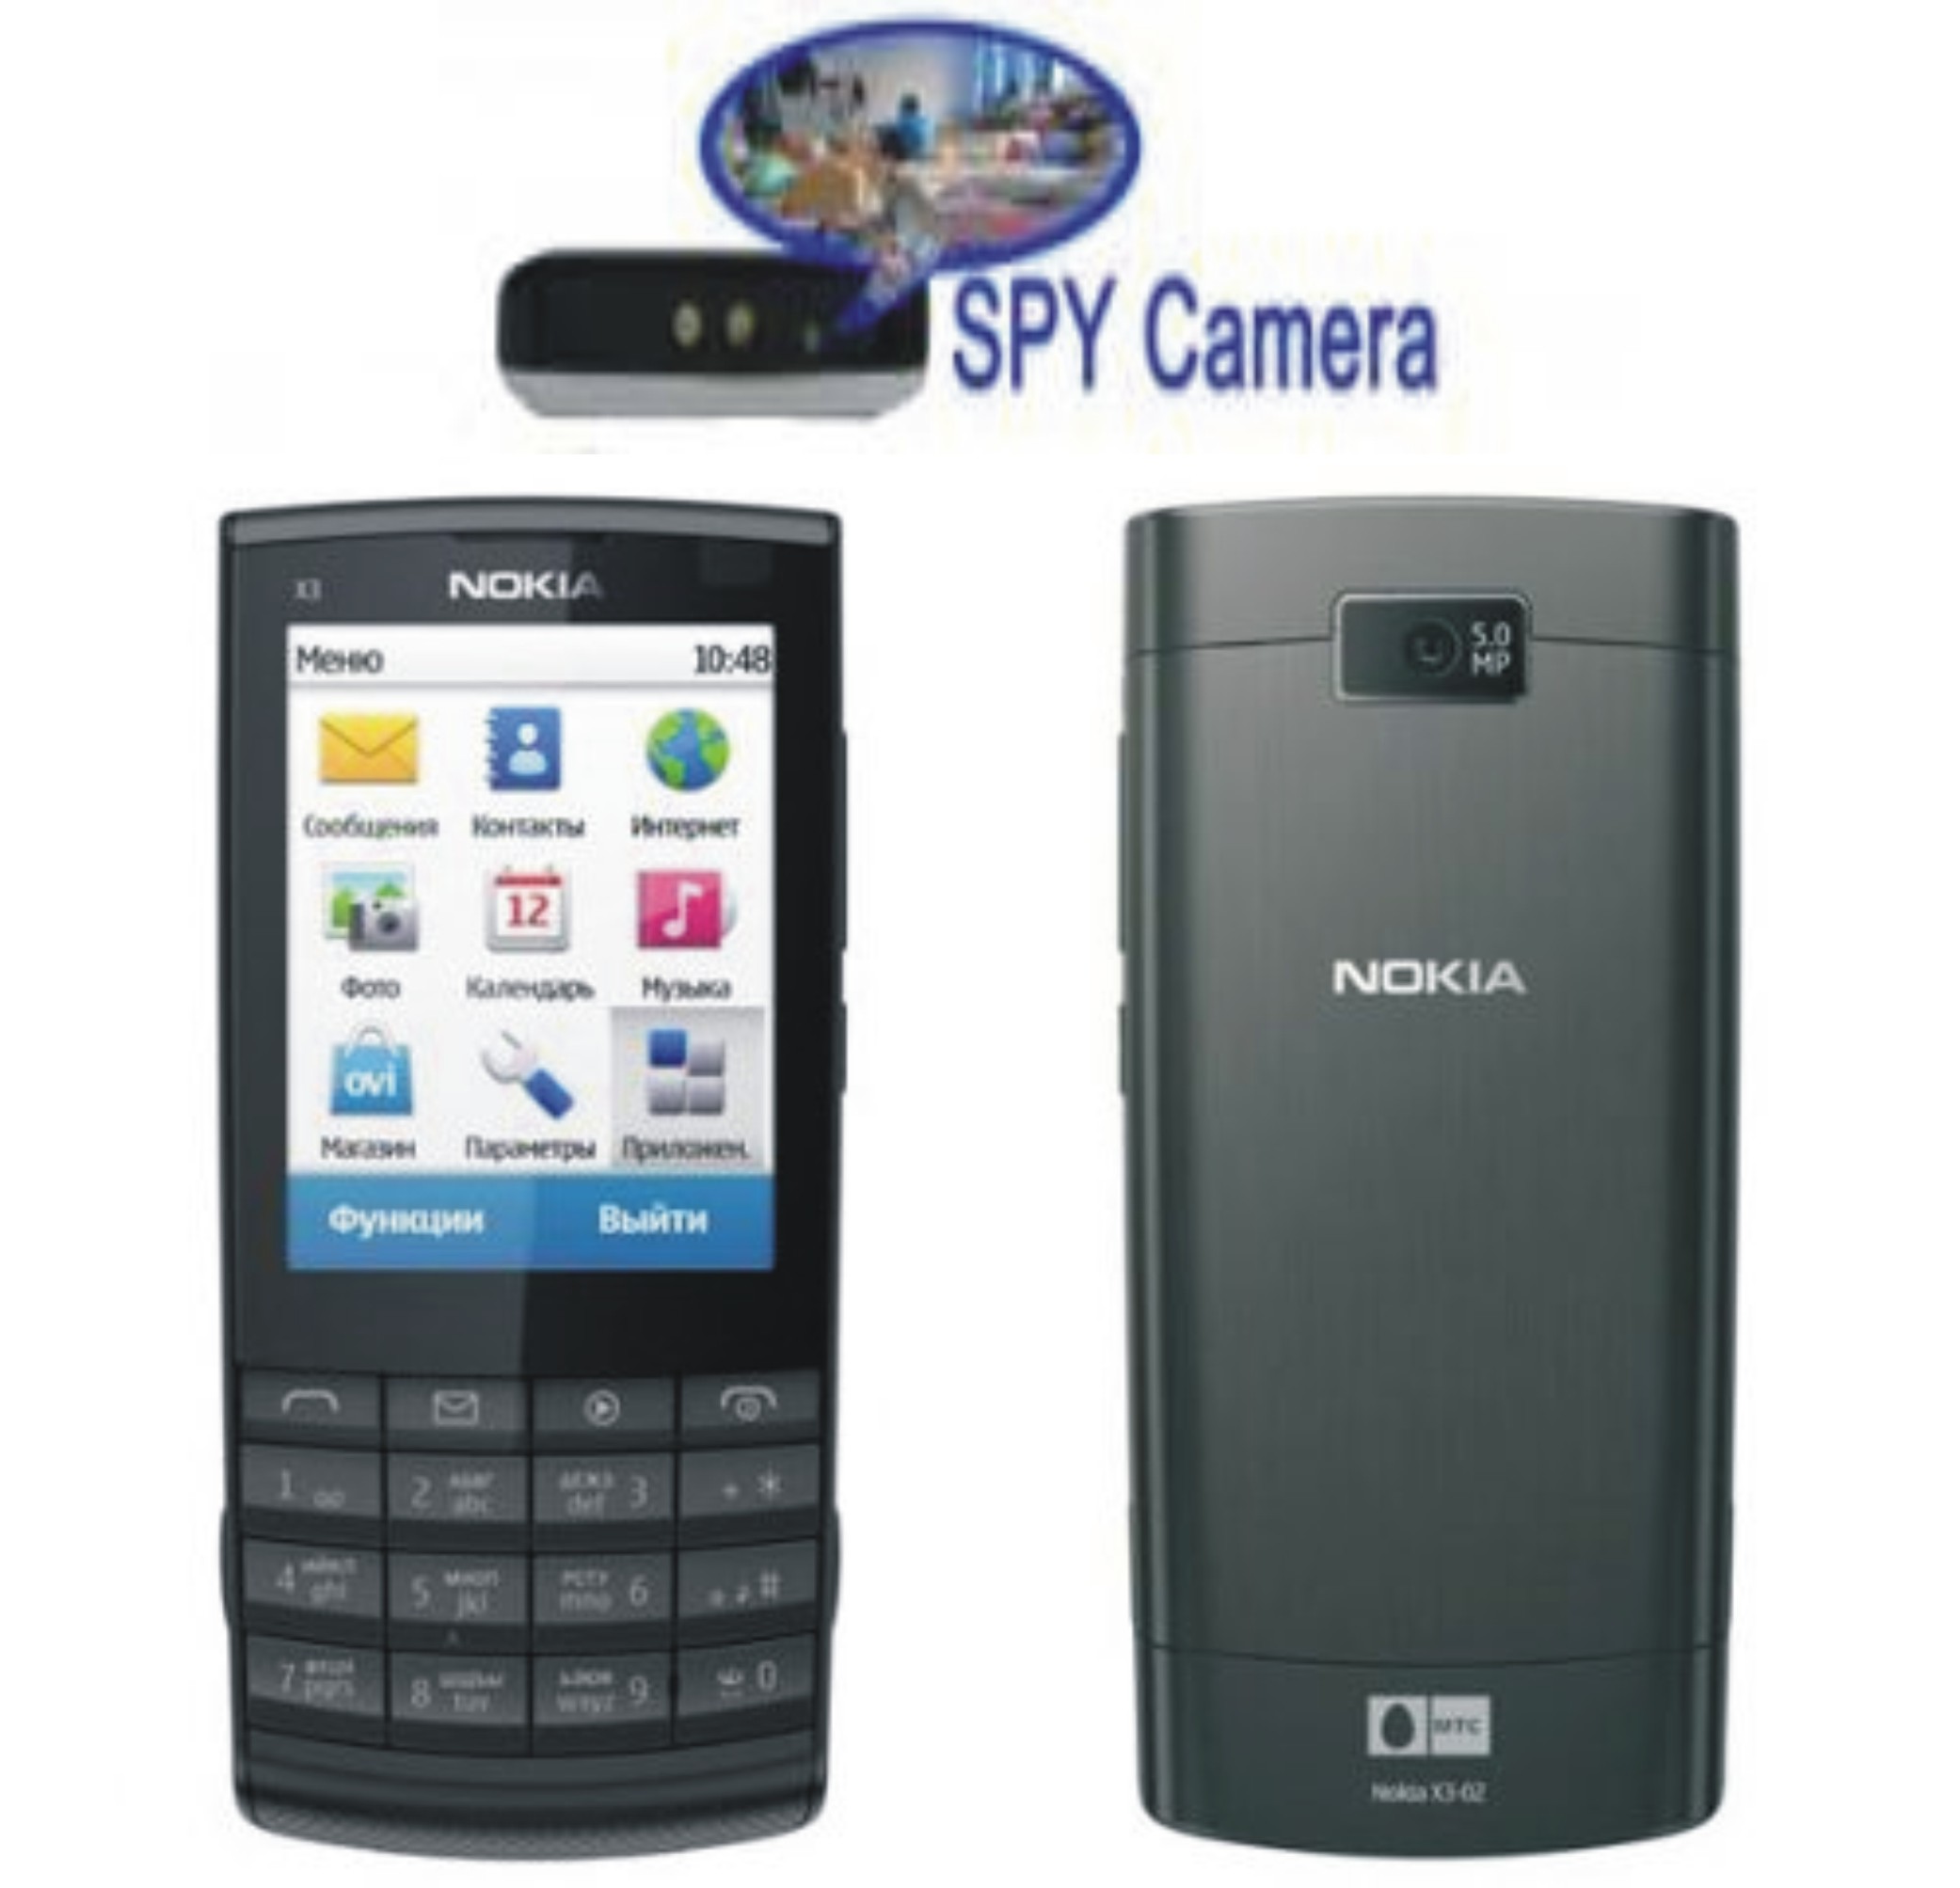 Spy Camera In Nokia Phone Touch Screen 